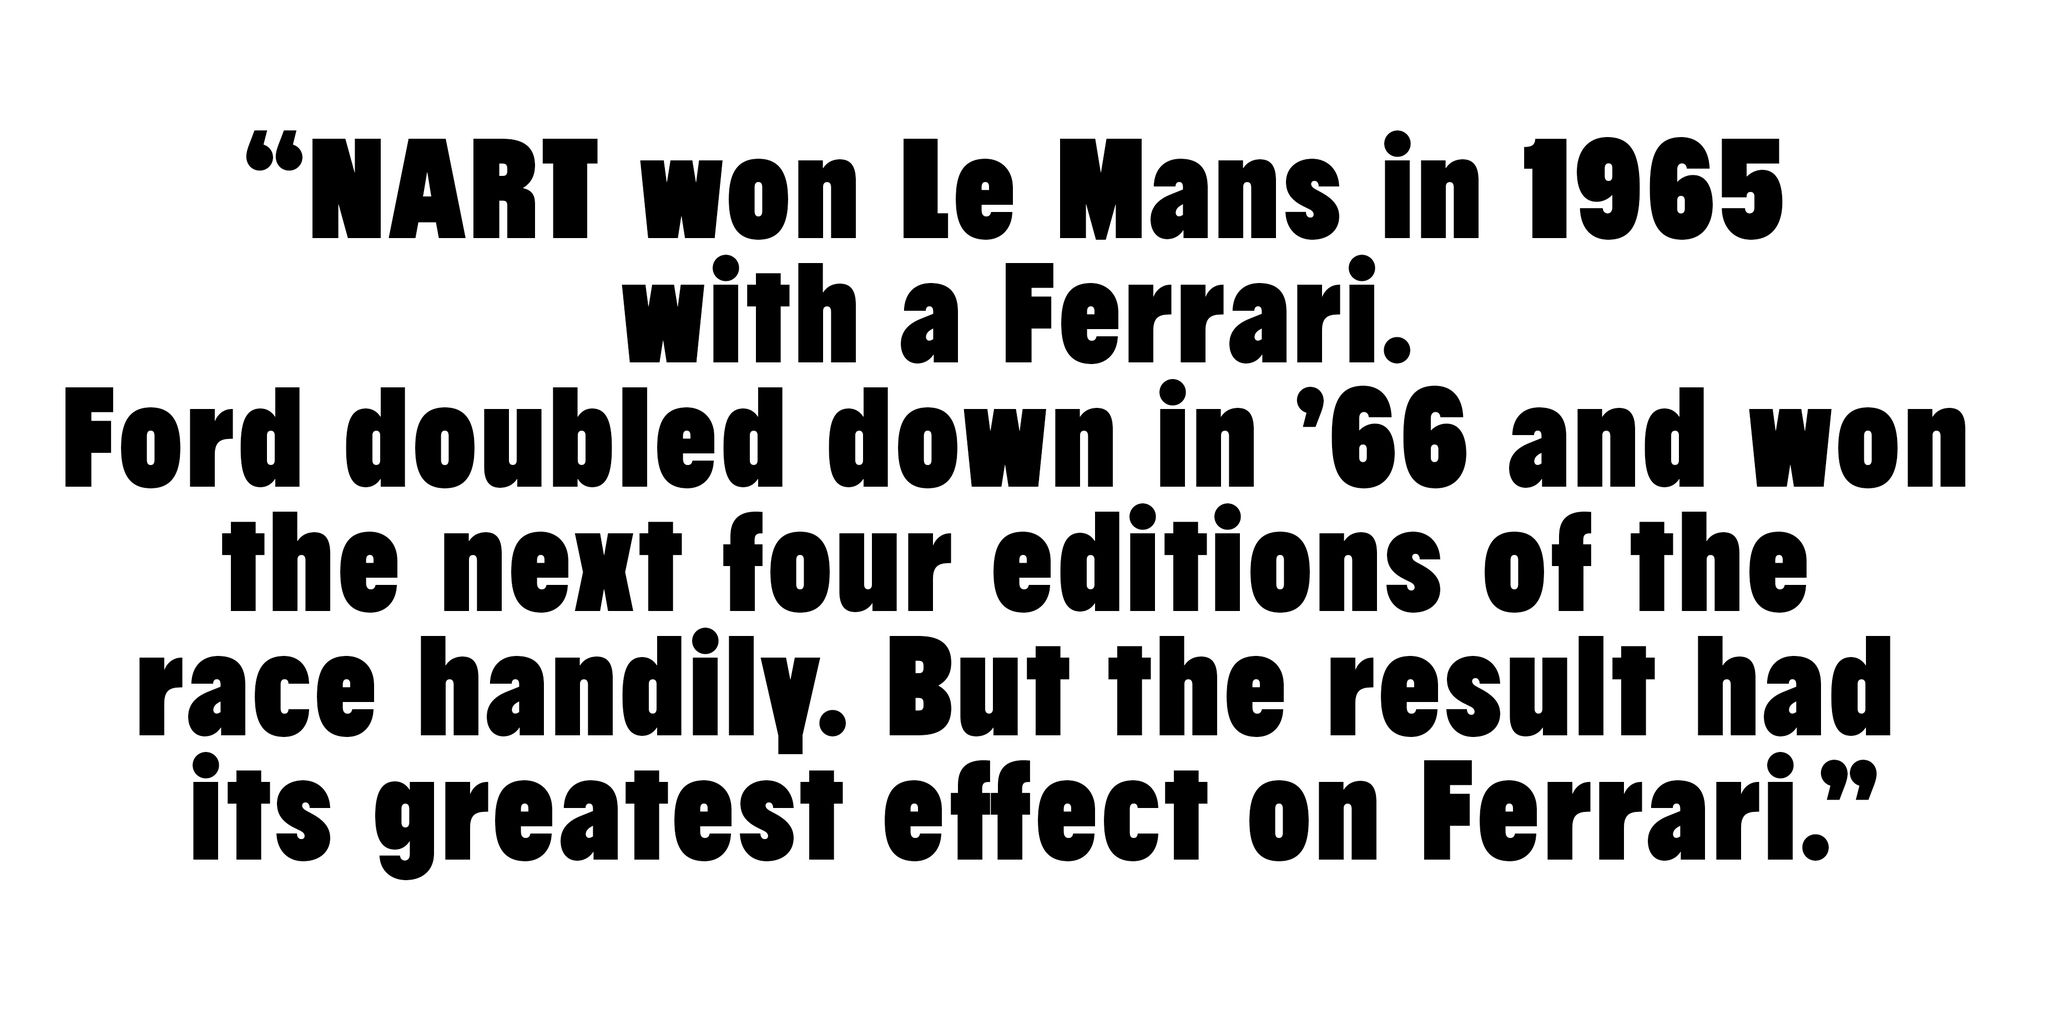 nart won le mans in 1965 pull quote